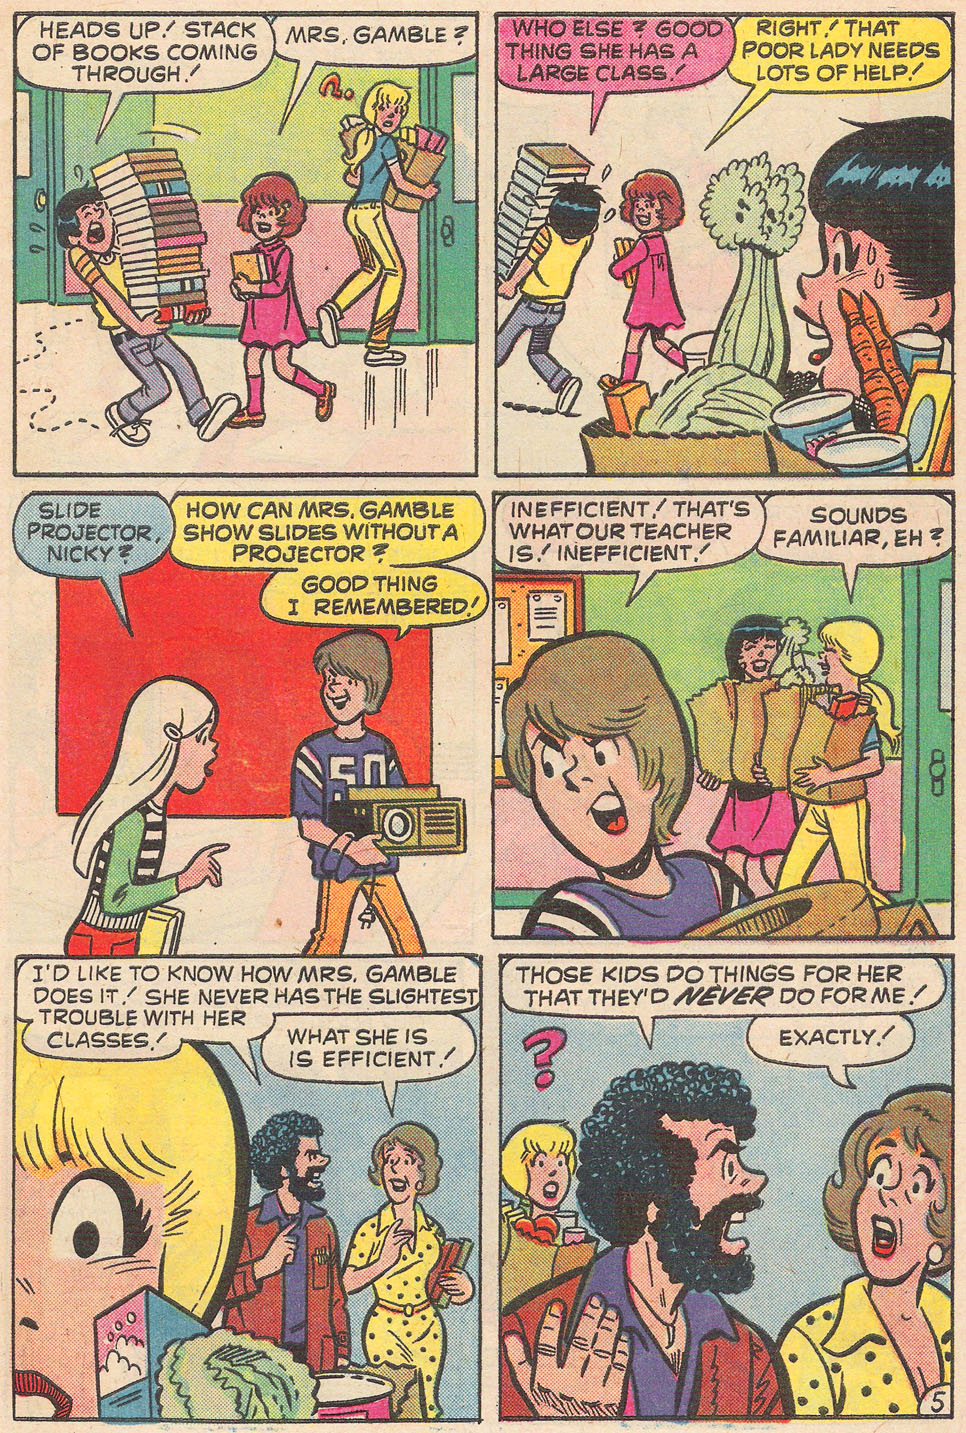 Read online Archie's Girls Betty and Veronica comic -  Issue #237 - 7